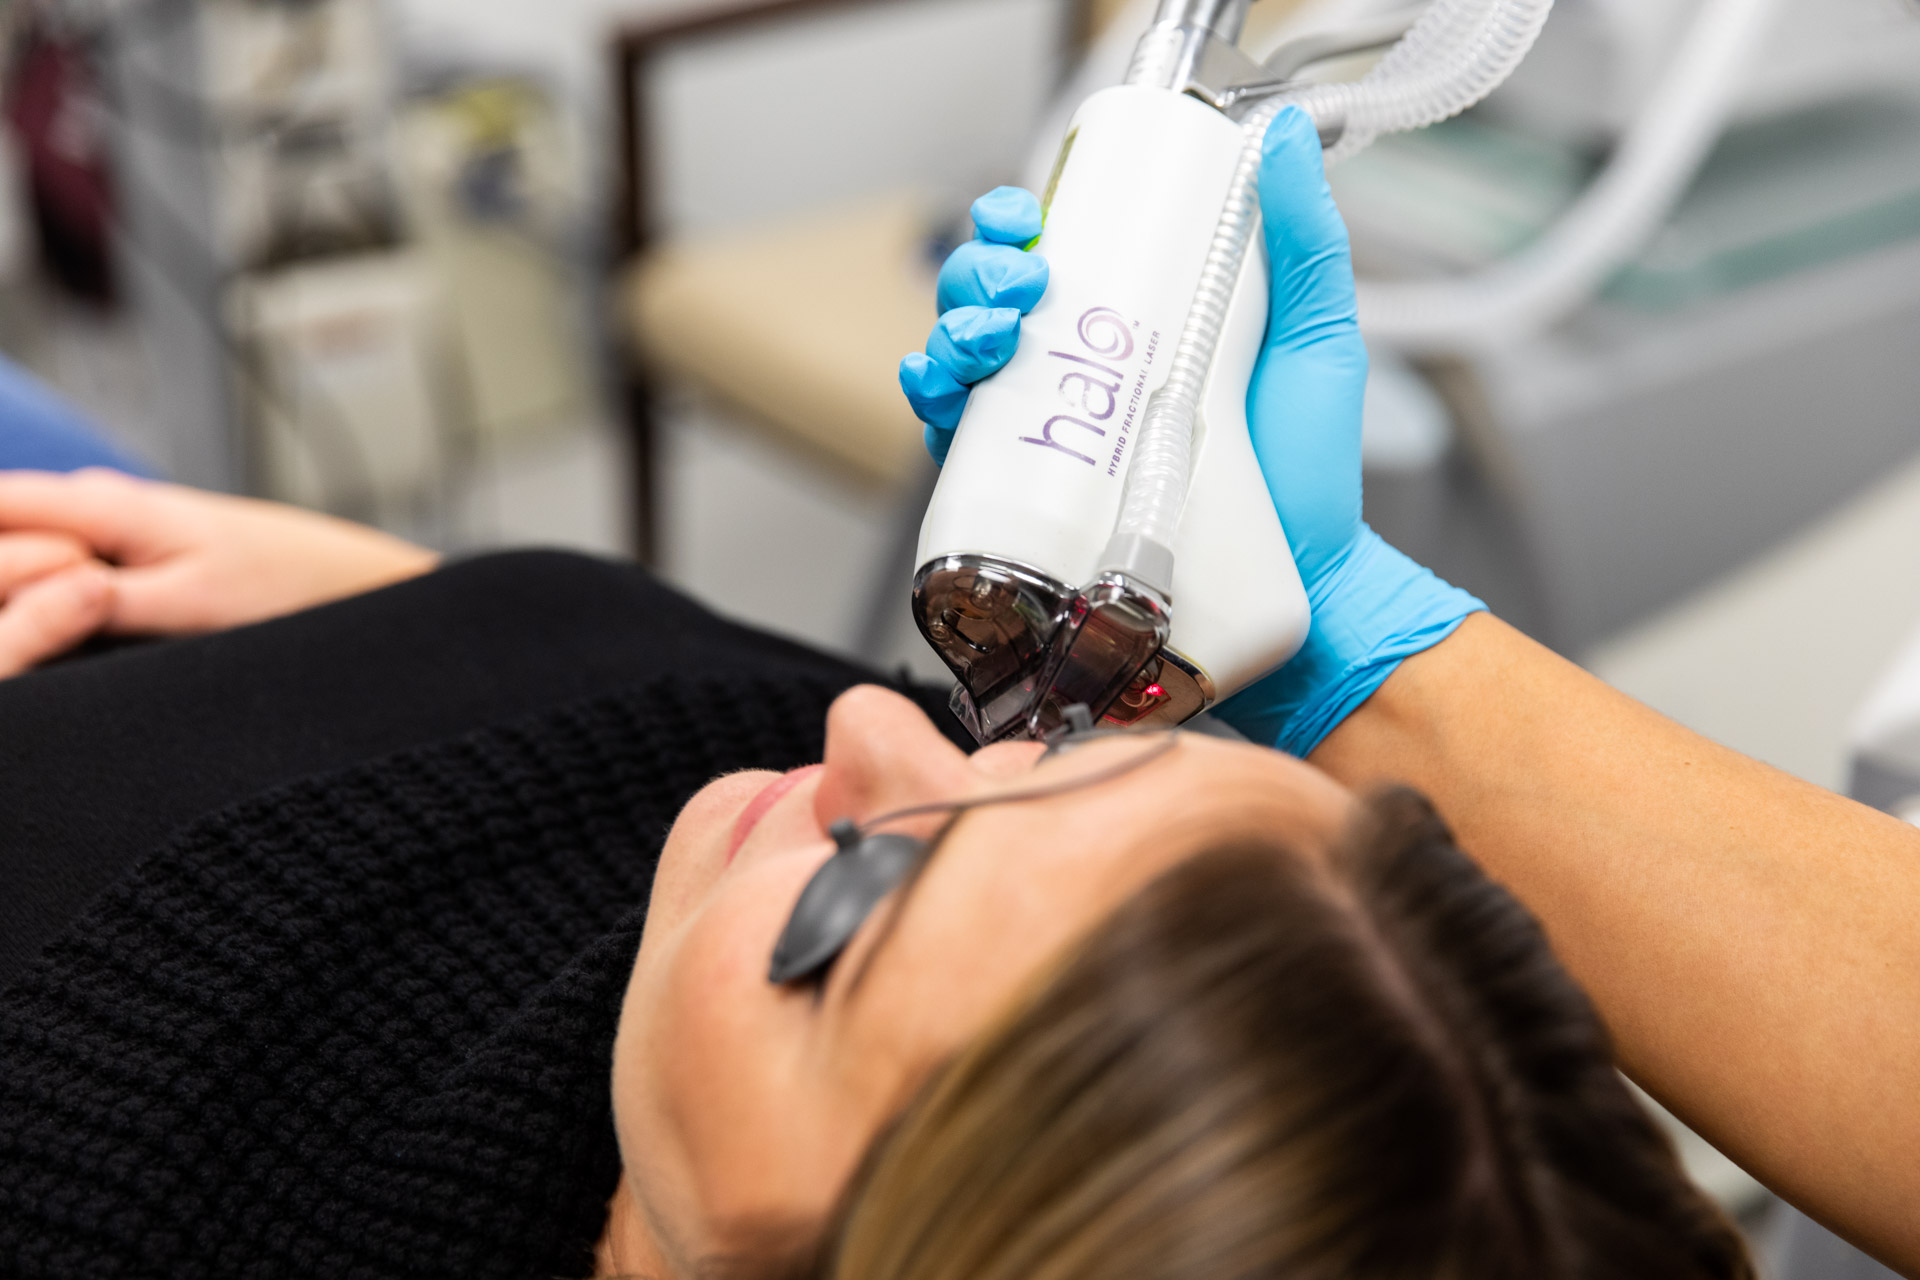 A practicioner performs a HALO treatment, one of our many low downtime laser treatments